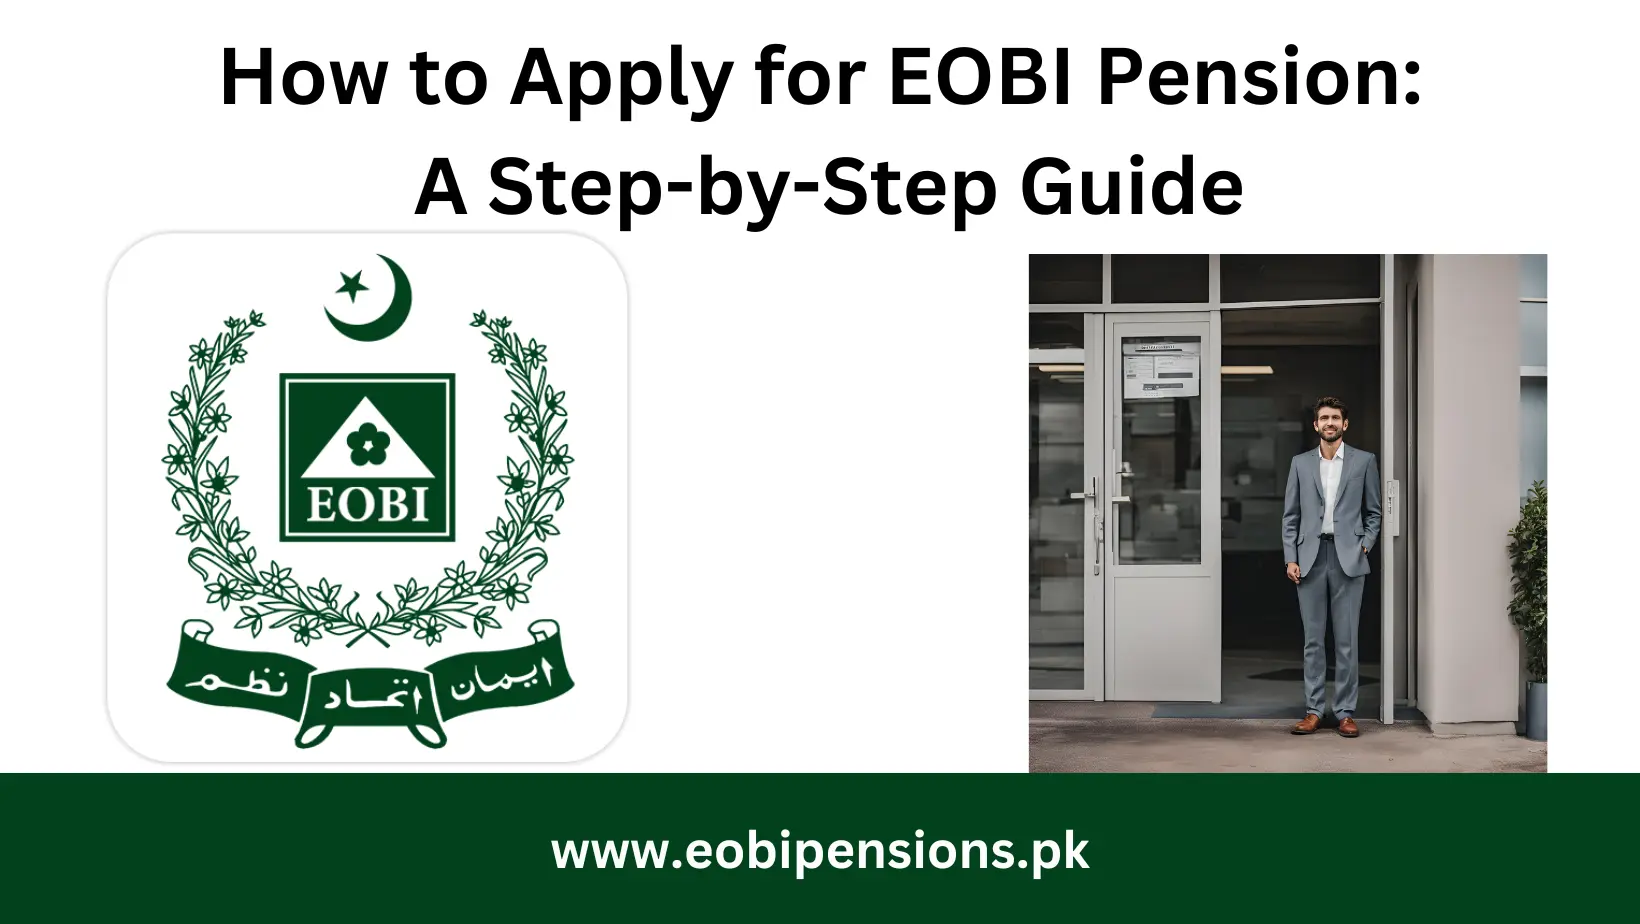 How to Apply for EOBI Pension